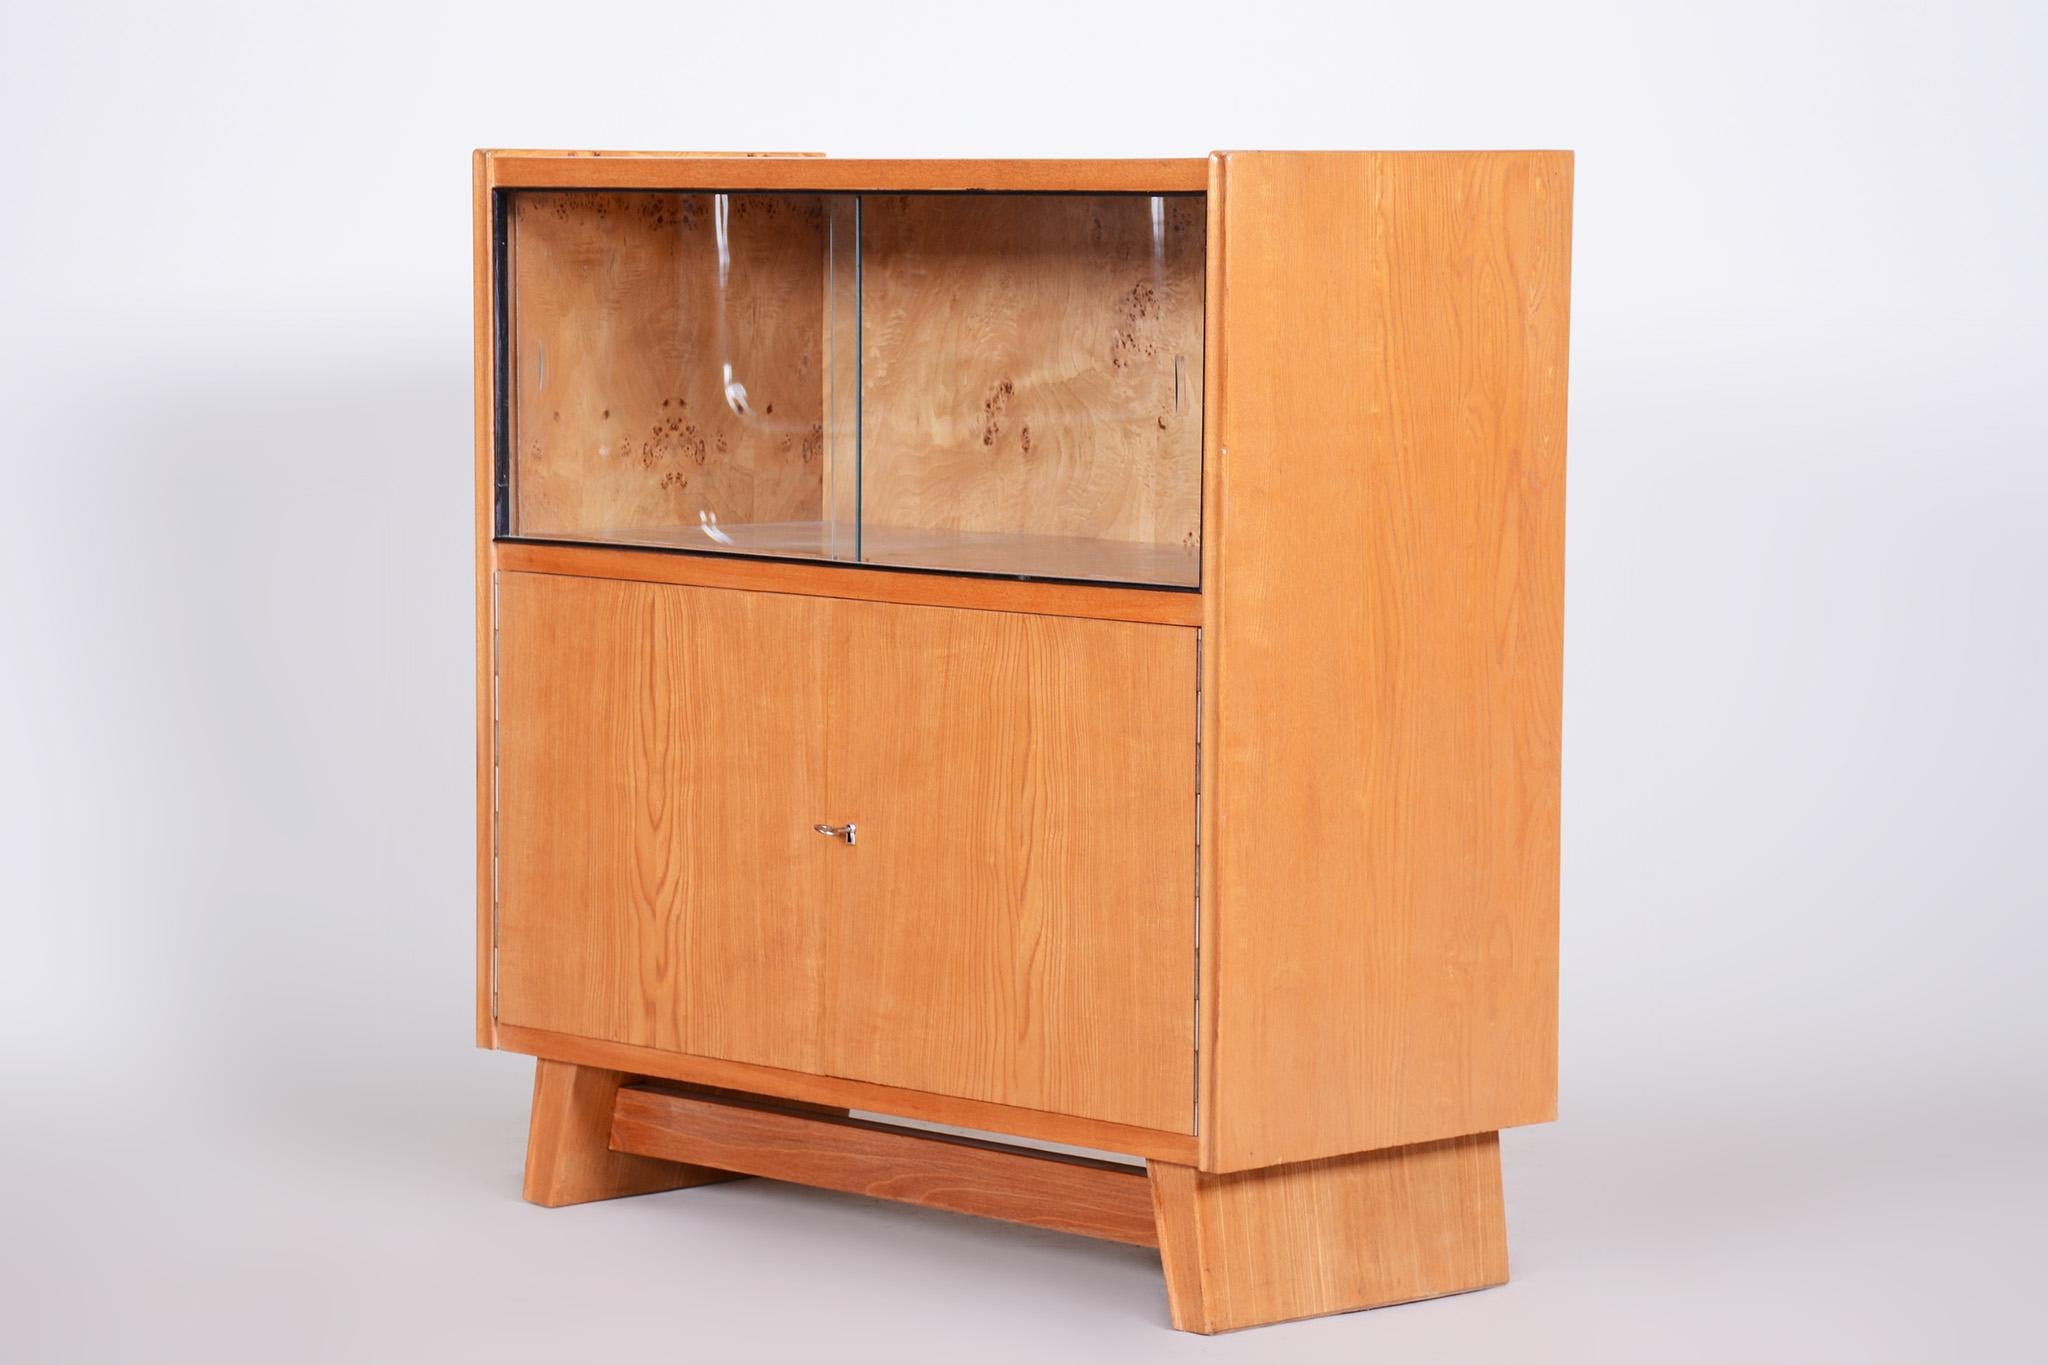 Ash Mid Century Modern Cabinet Made in 1940s Czechia, Fully Restored  For Sale